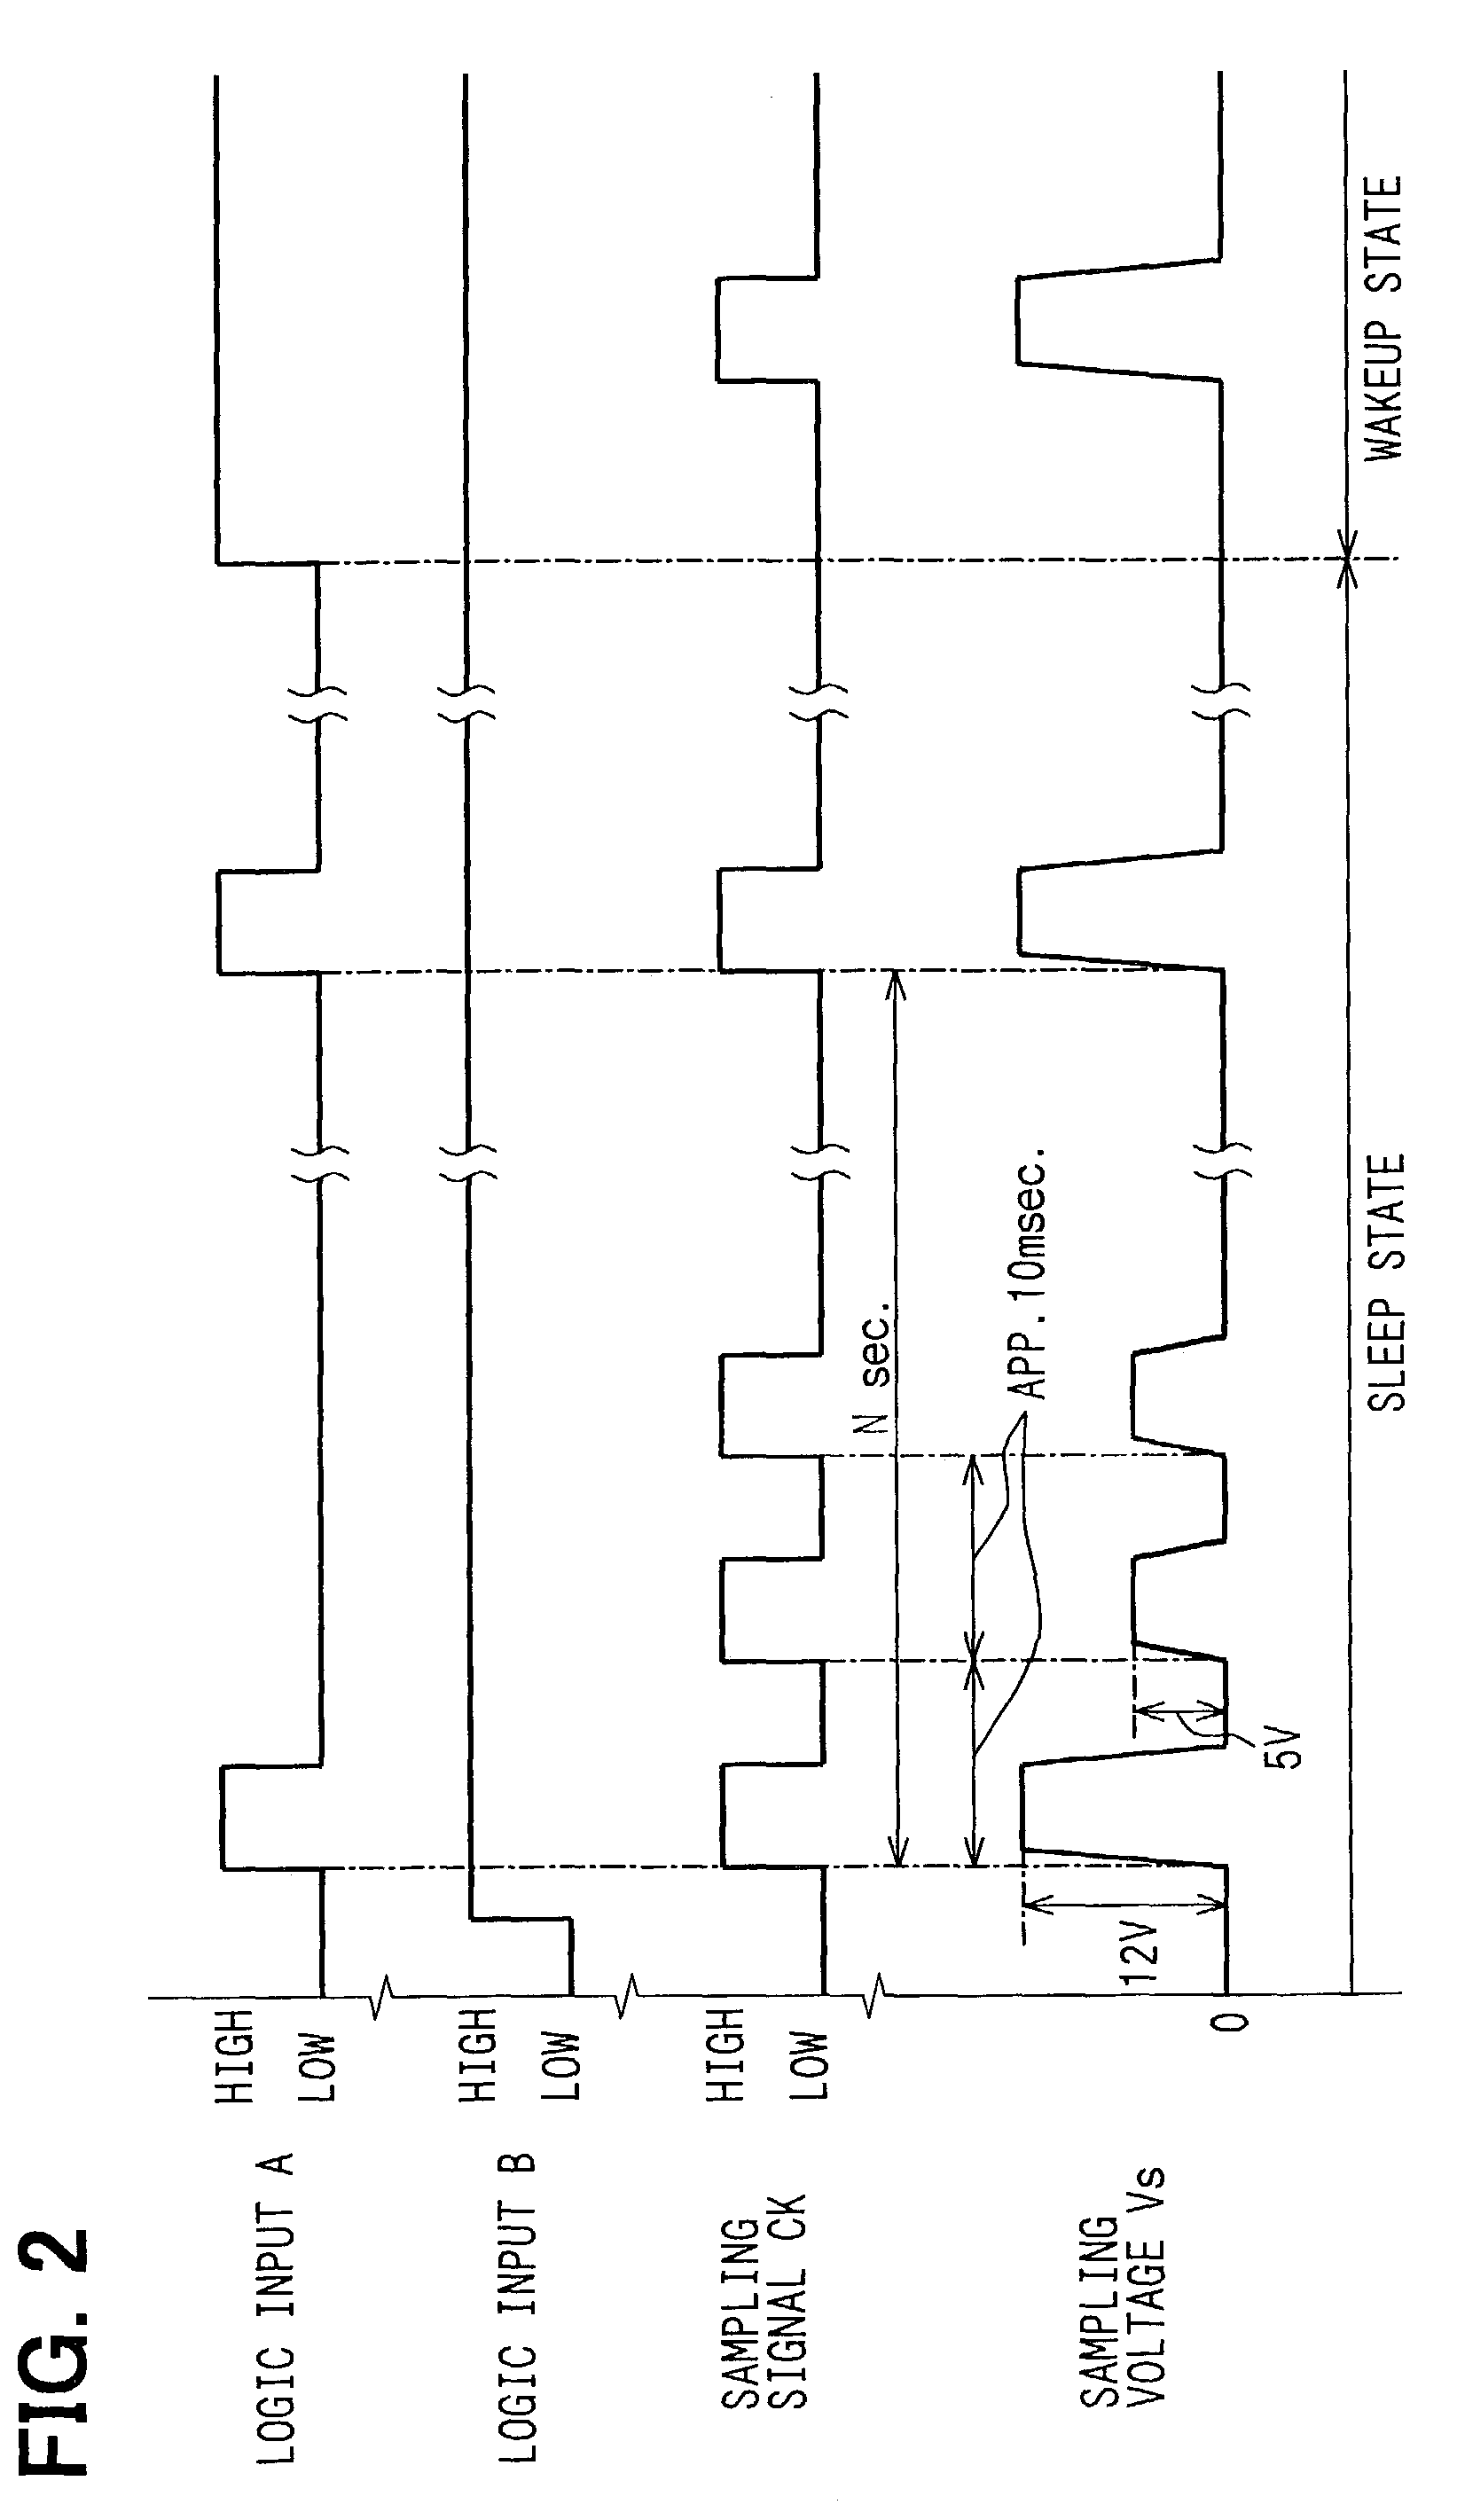 Switching status determination device and method for determining switching status